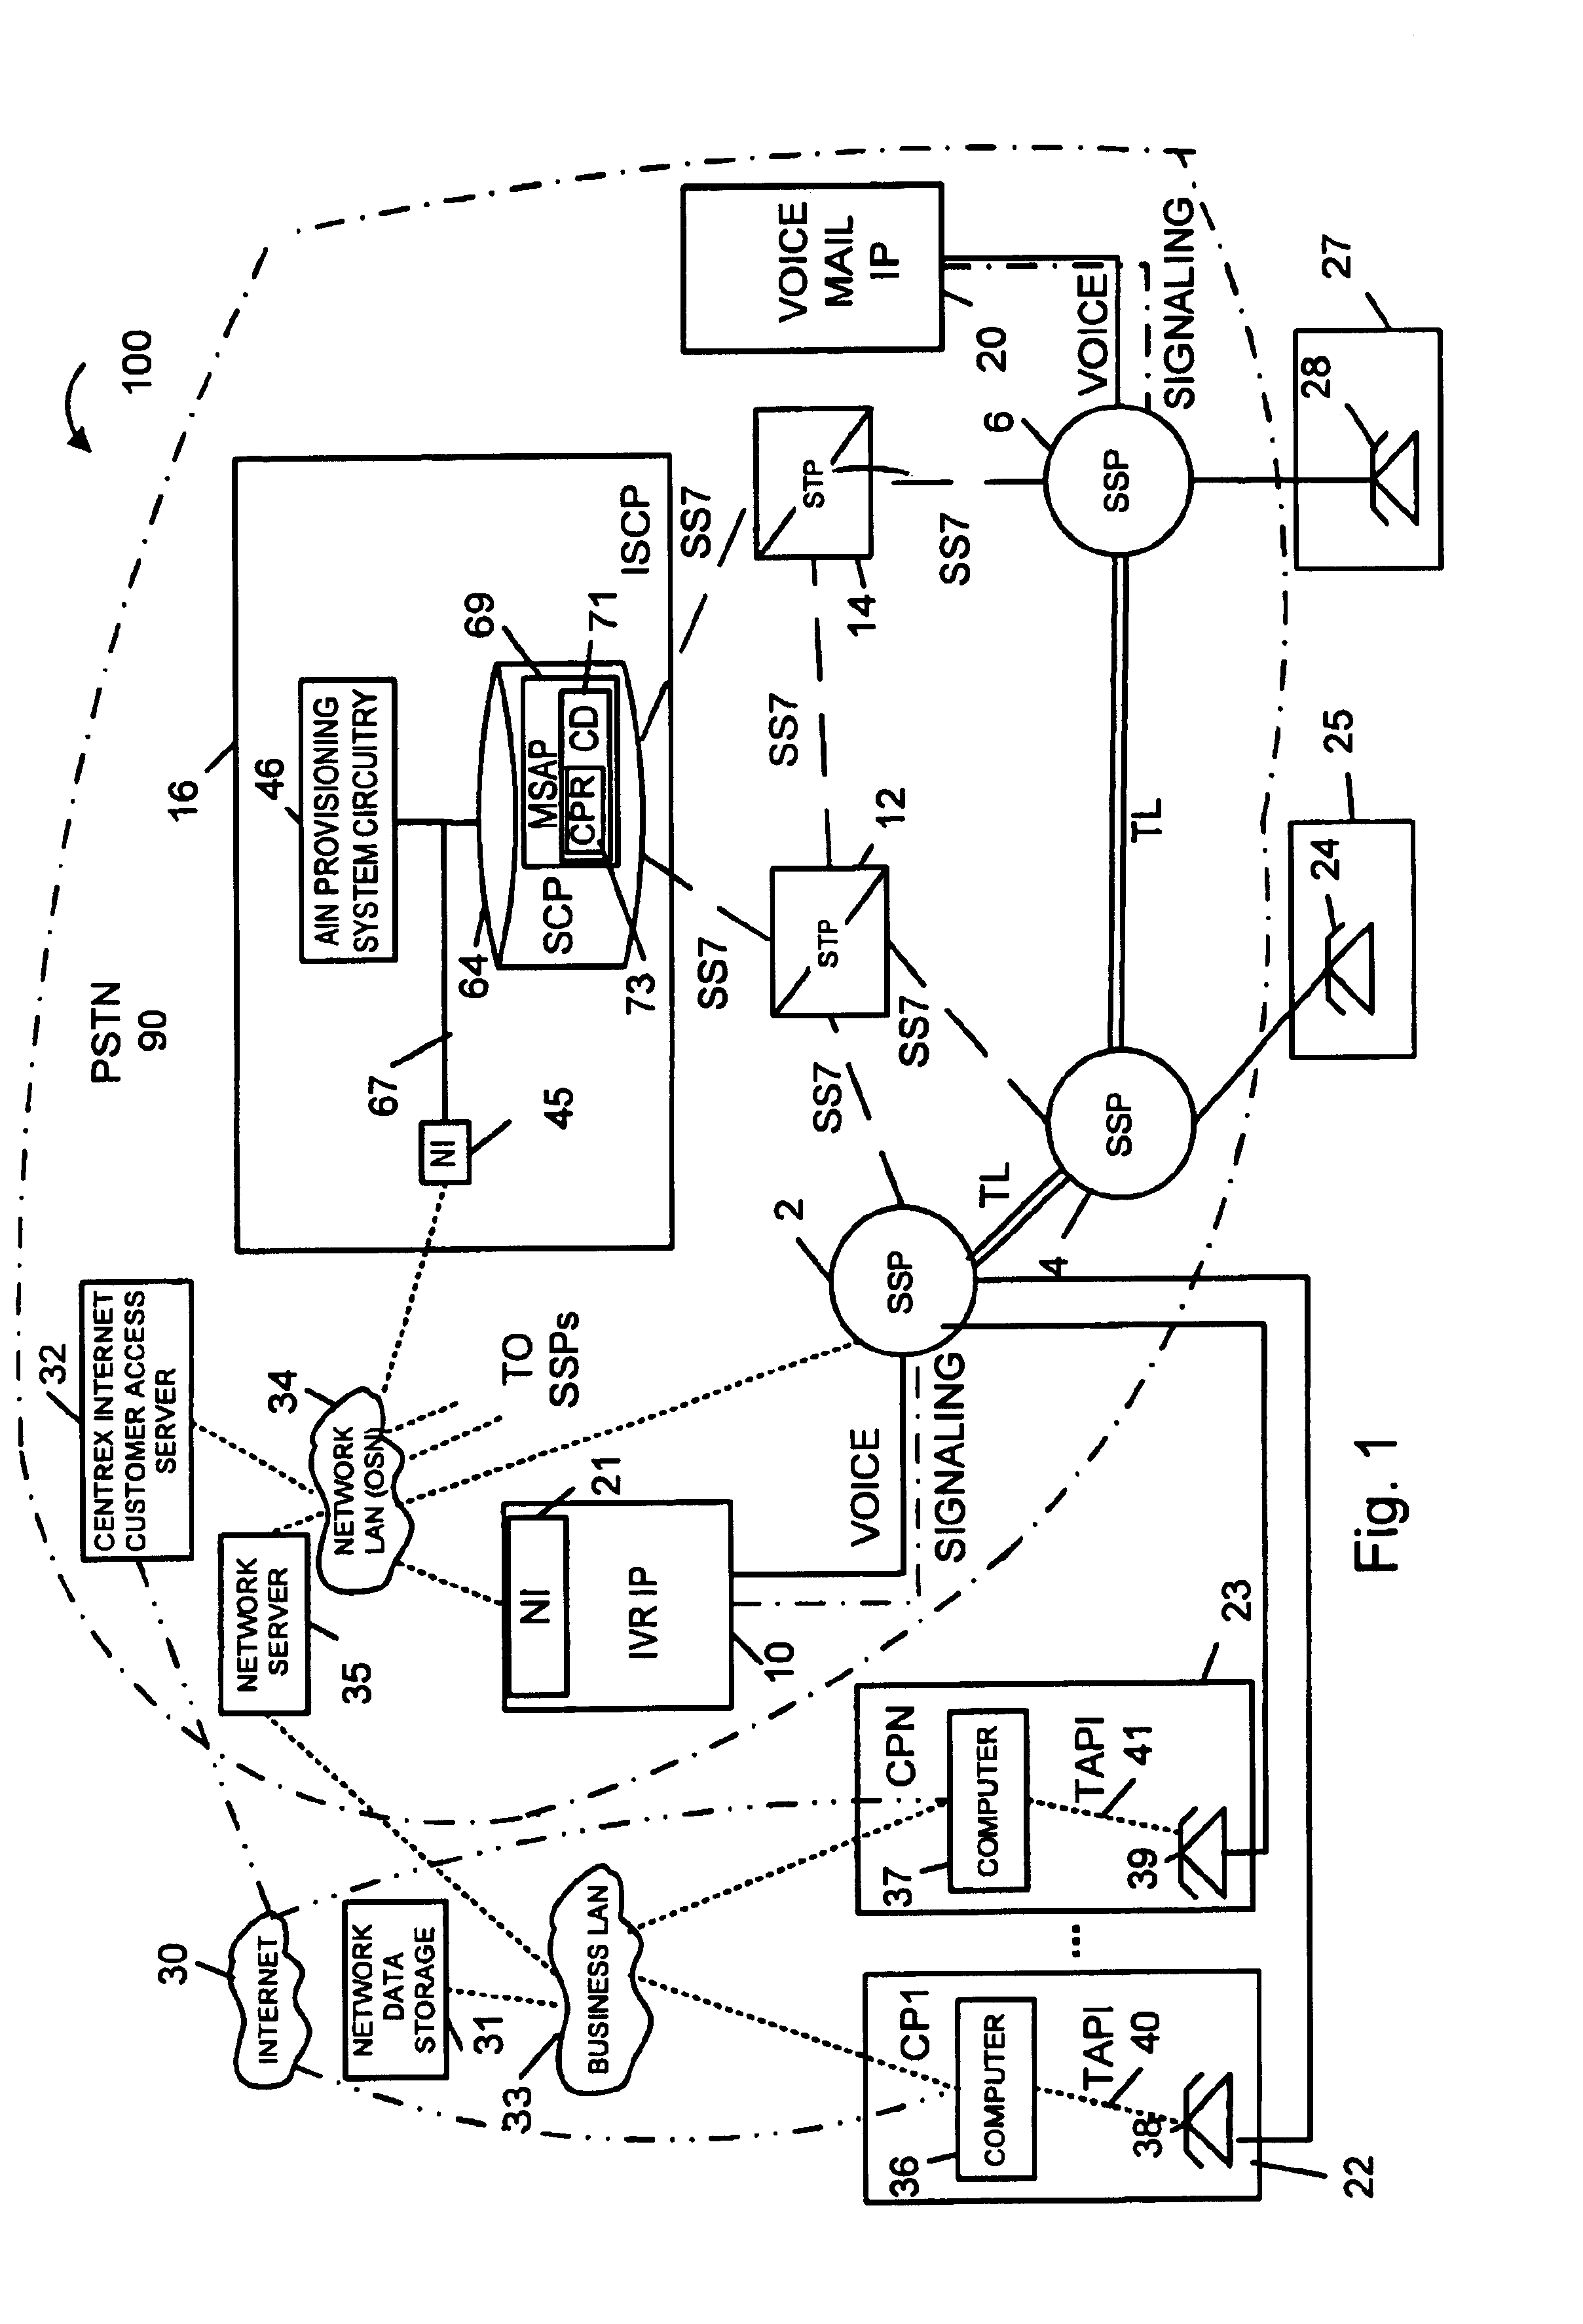 Methods and apparatus for facilitating the interaction between multiple telephone and computer users